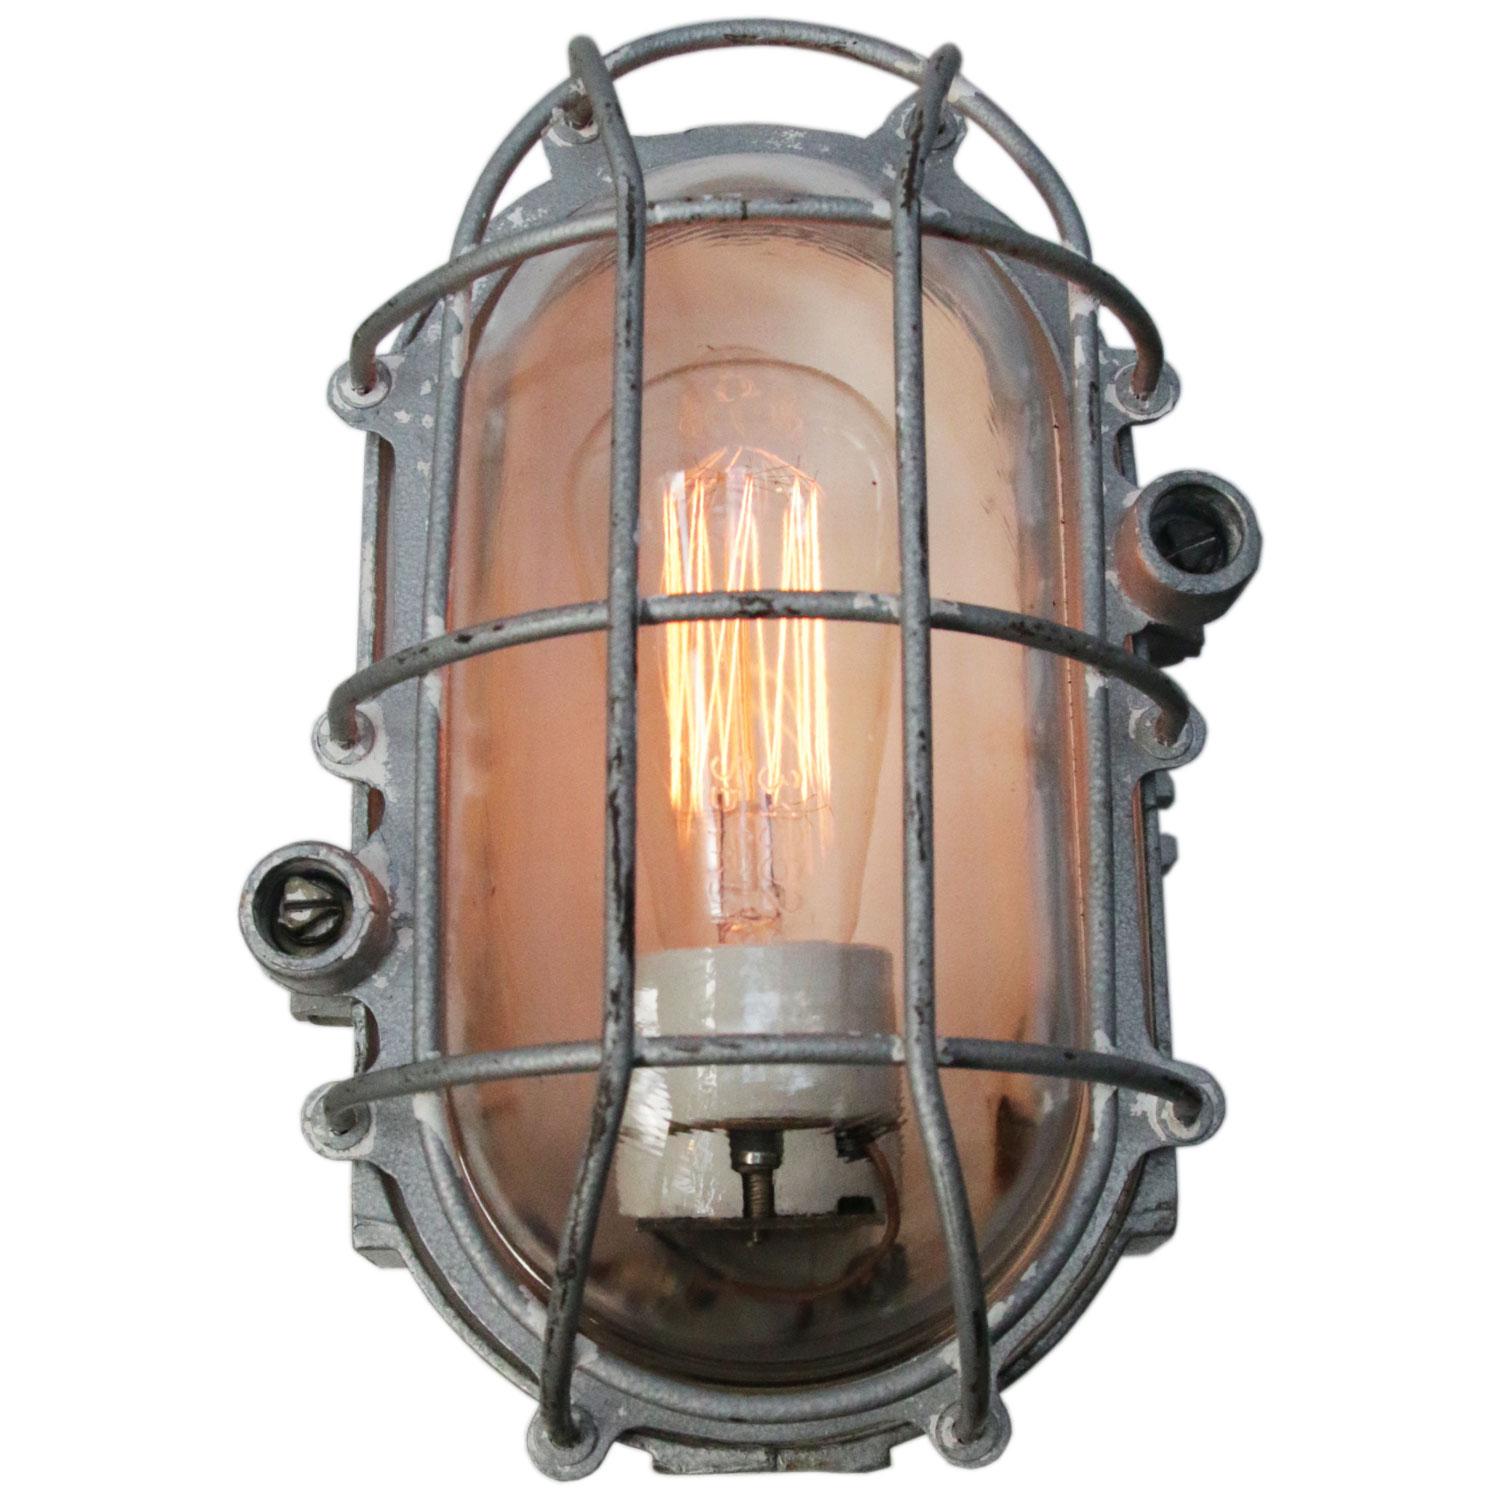 Industrial wall or ceiling lamp
cast aluminum, clear glass

For use inside

Weight: 2.75 kg / 6.1 lb

Priced individual item. All lamps have been made suitable by international standards for incandescent light bulbs, energy-efficient and LED